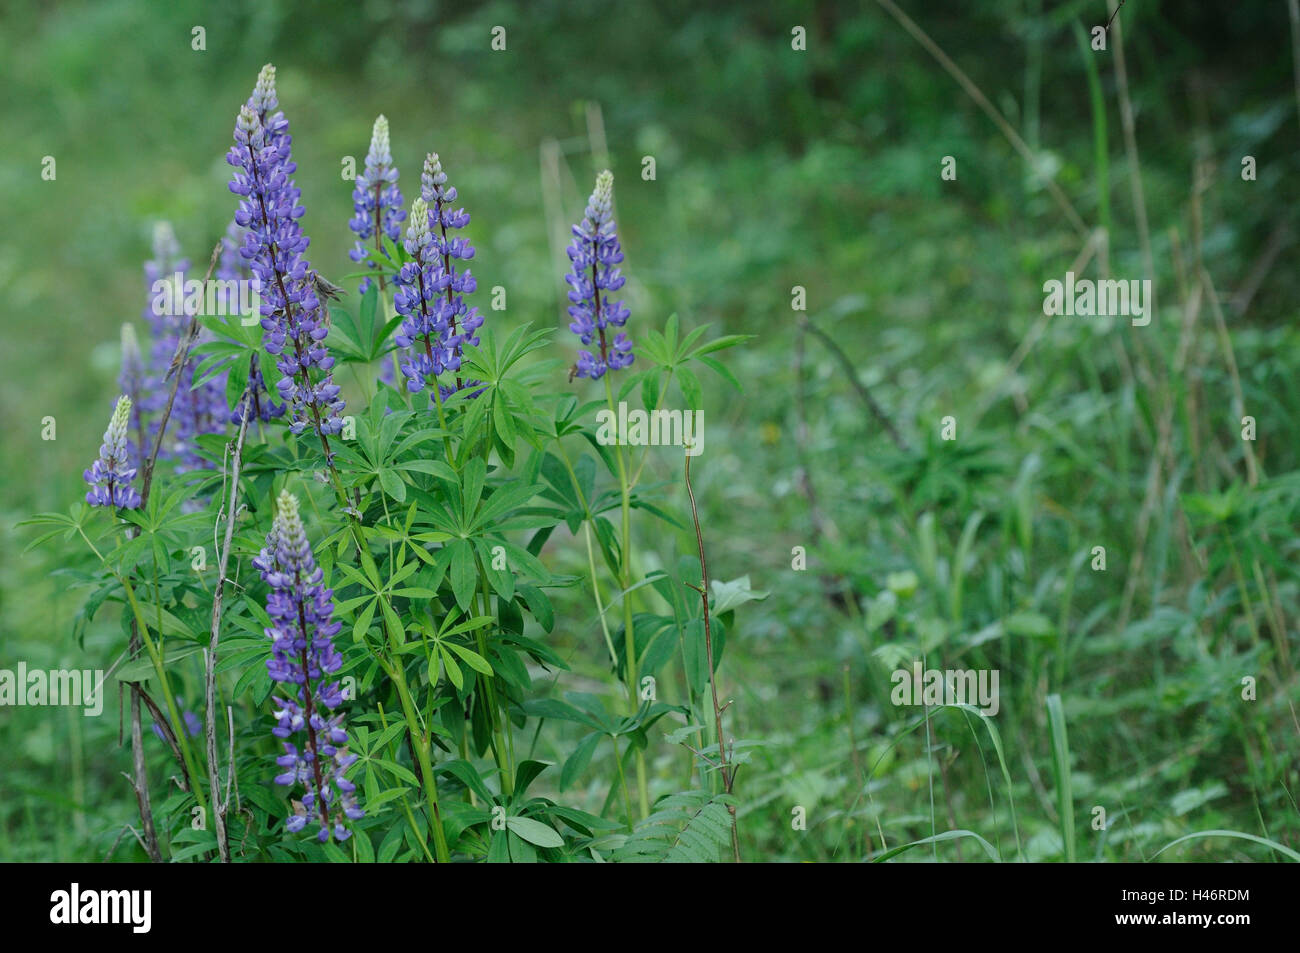 Blue lupin, Lupinus angustifolius, pink, blossom, focus on the foreground, Germany, Stock Photo